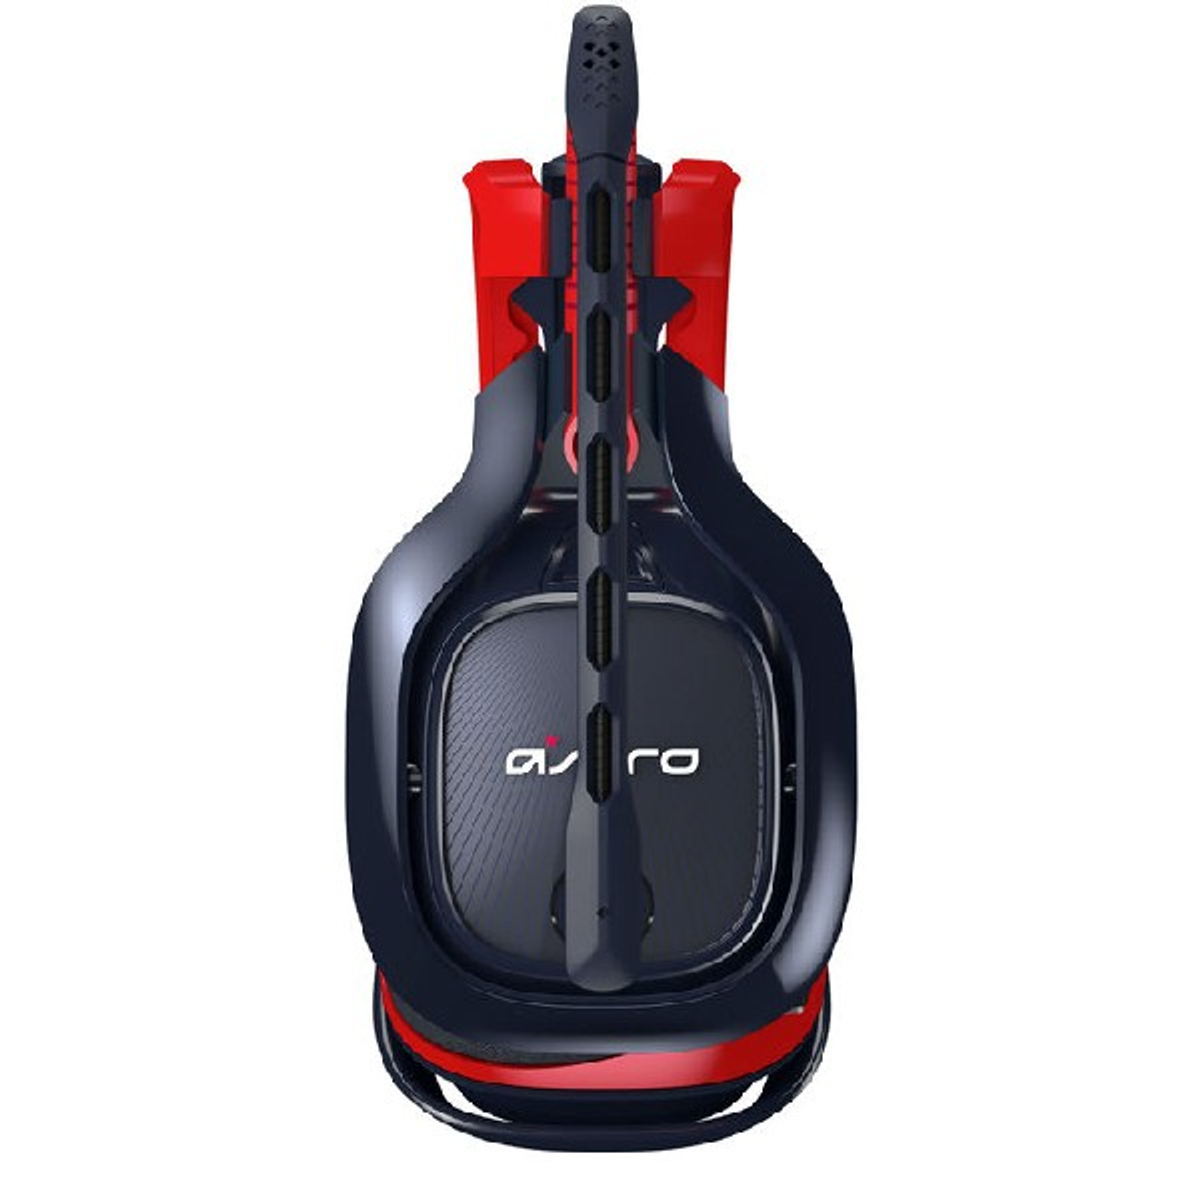 ASTRO 939-001668 A40 ANNIVERSARY RED/BLUE, Headset Over-ear EDS Gaming TR Rot/Blau 10TH